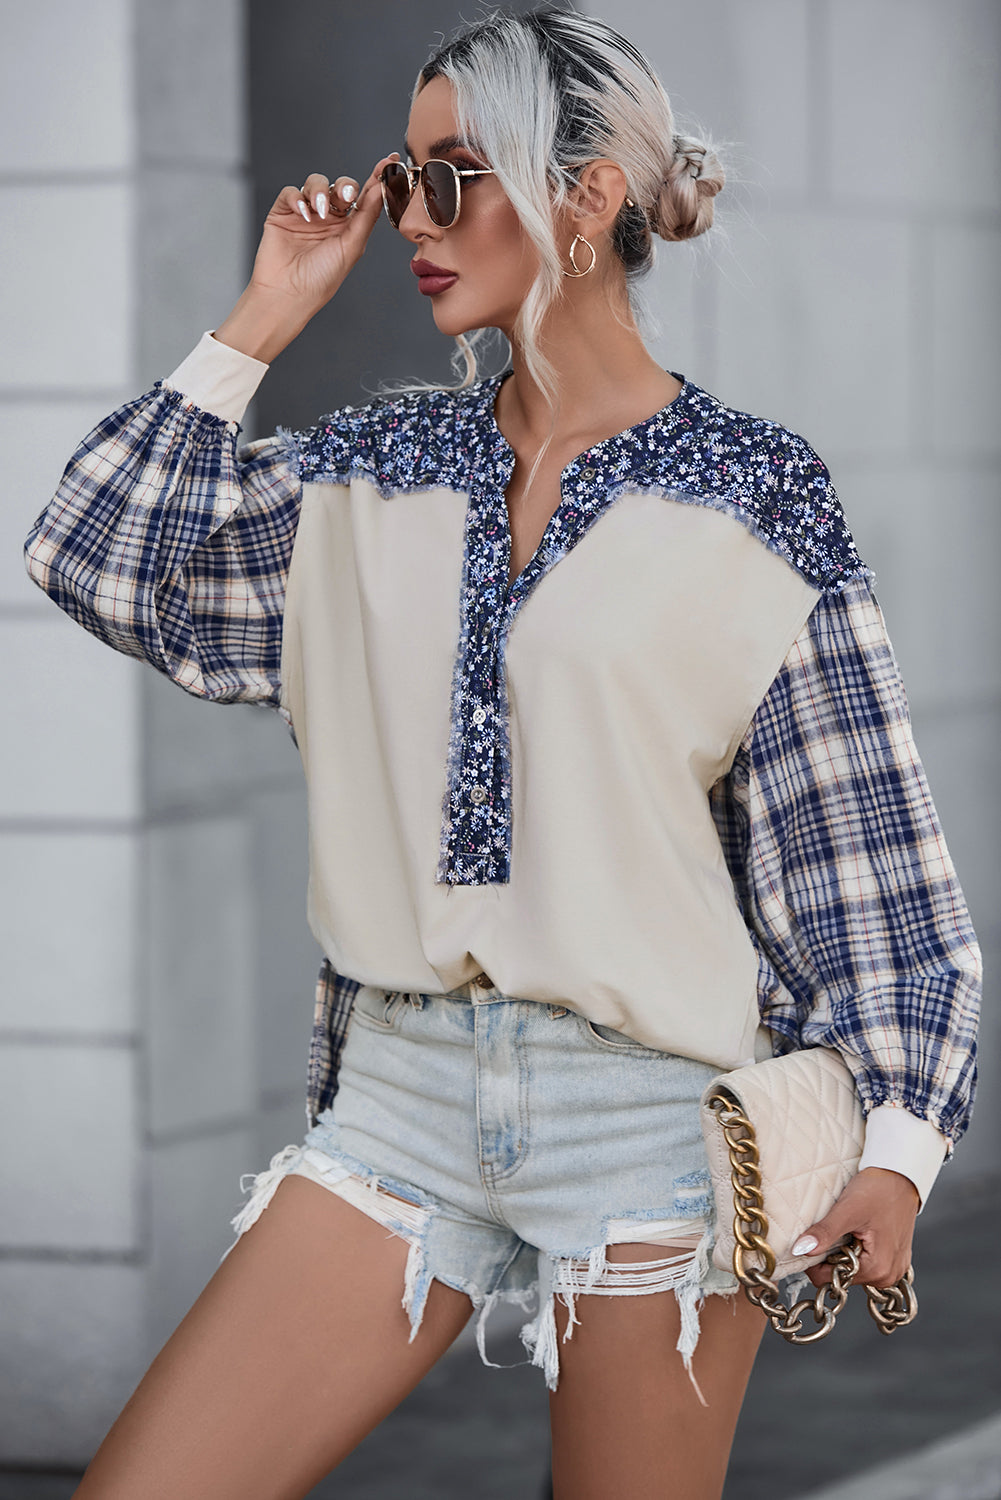 Yellow Floral Plaid Mixed Print Bishop Sleeve Patchwork Top